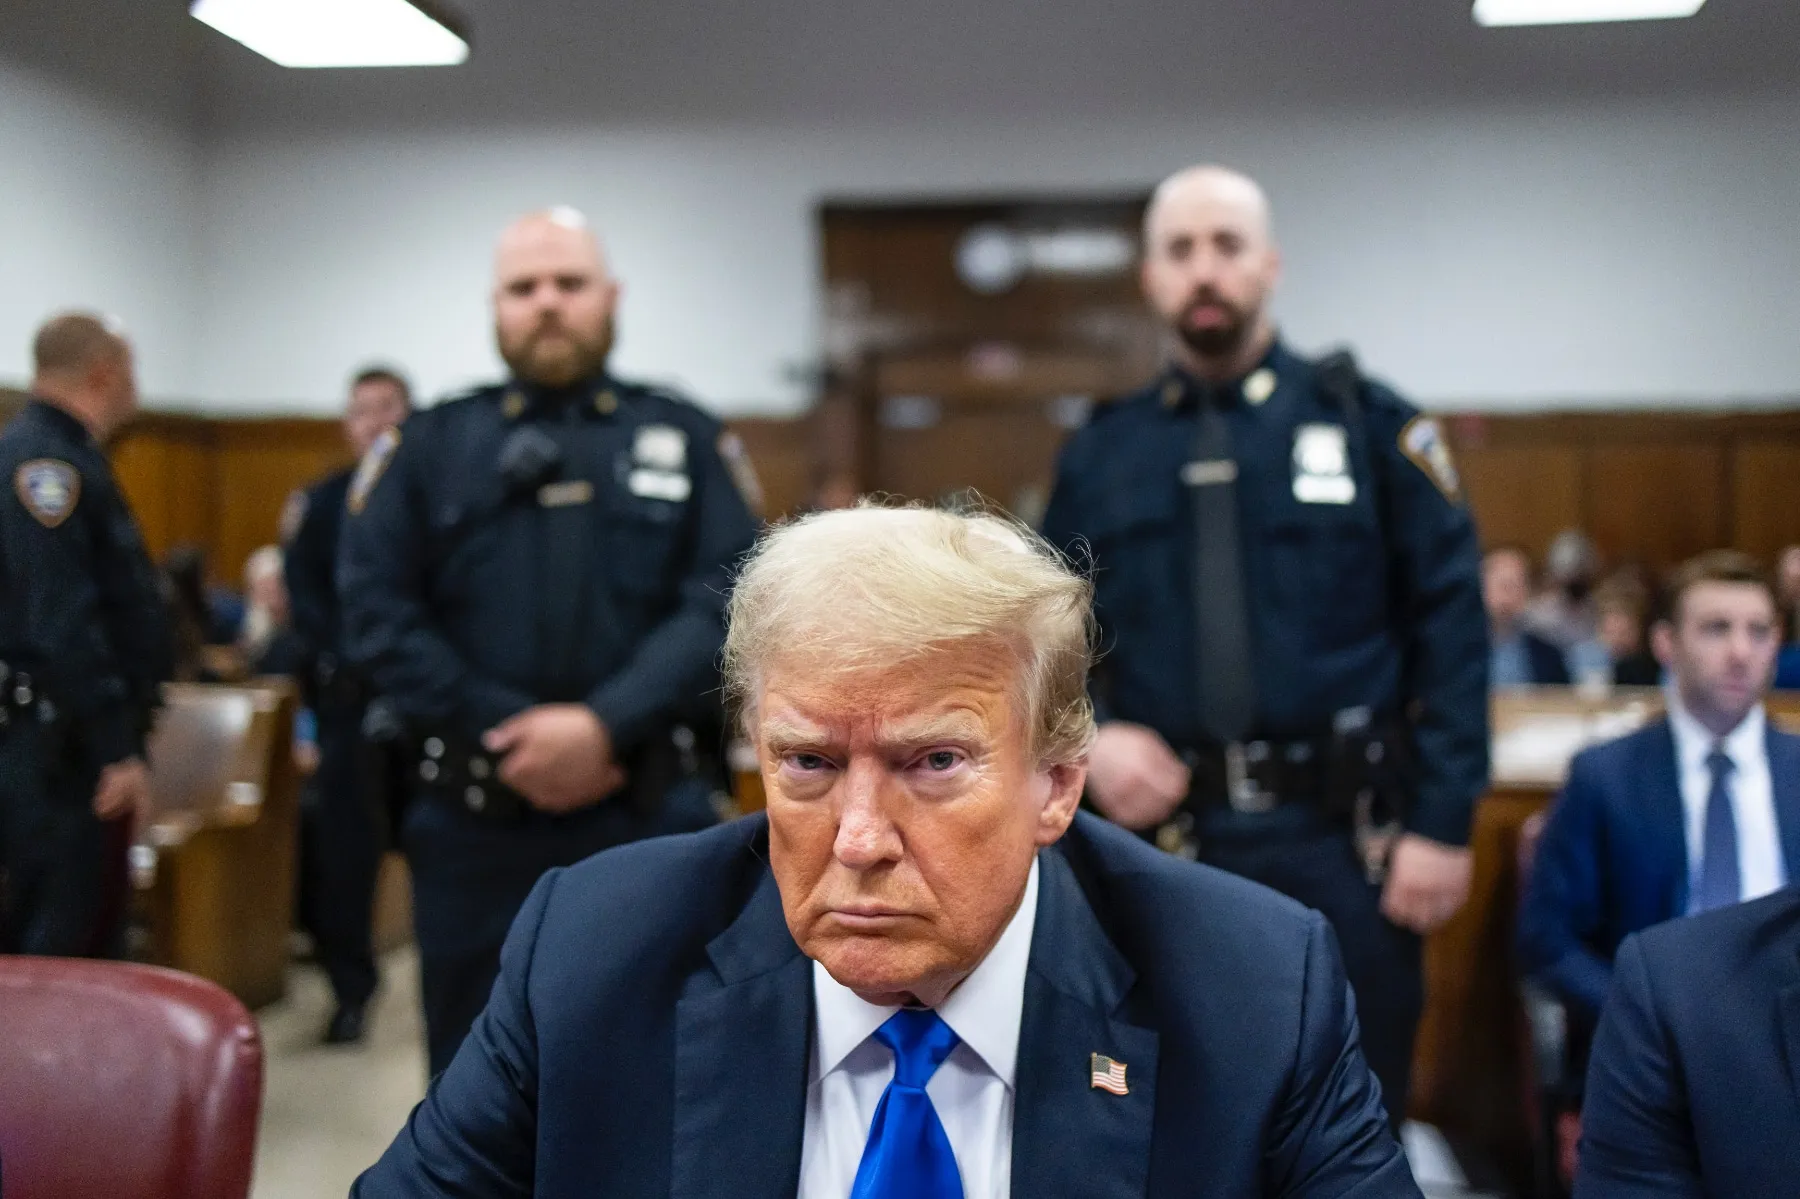 Former President Donald Trump sits at the defendant's table in the courthouse